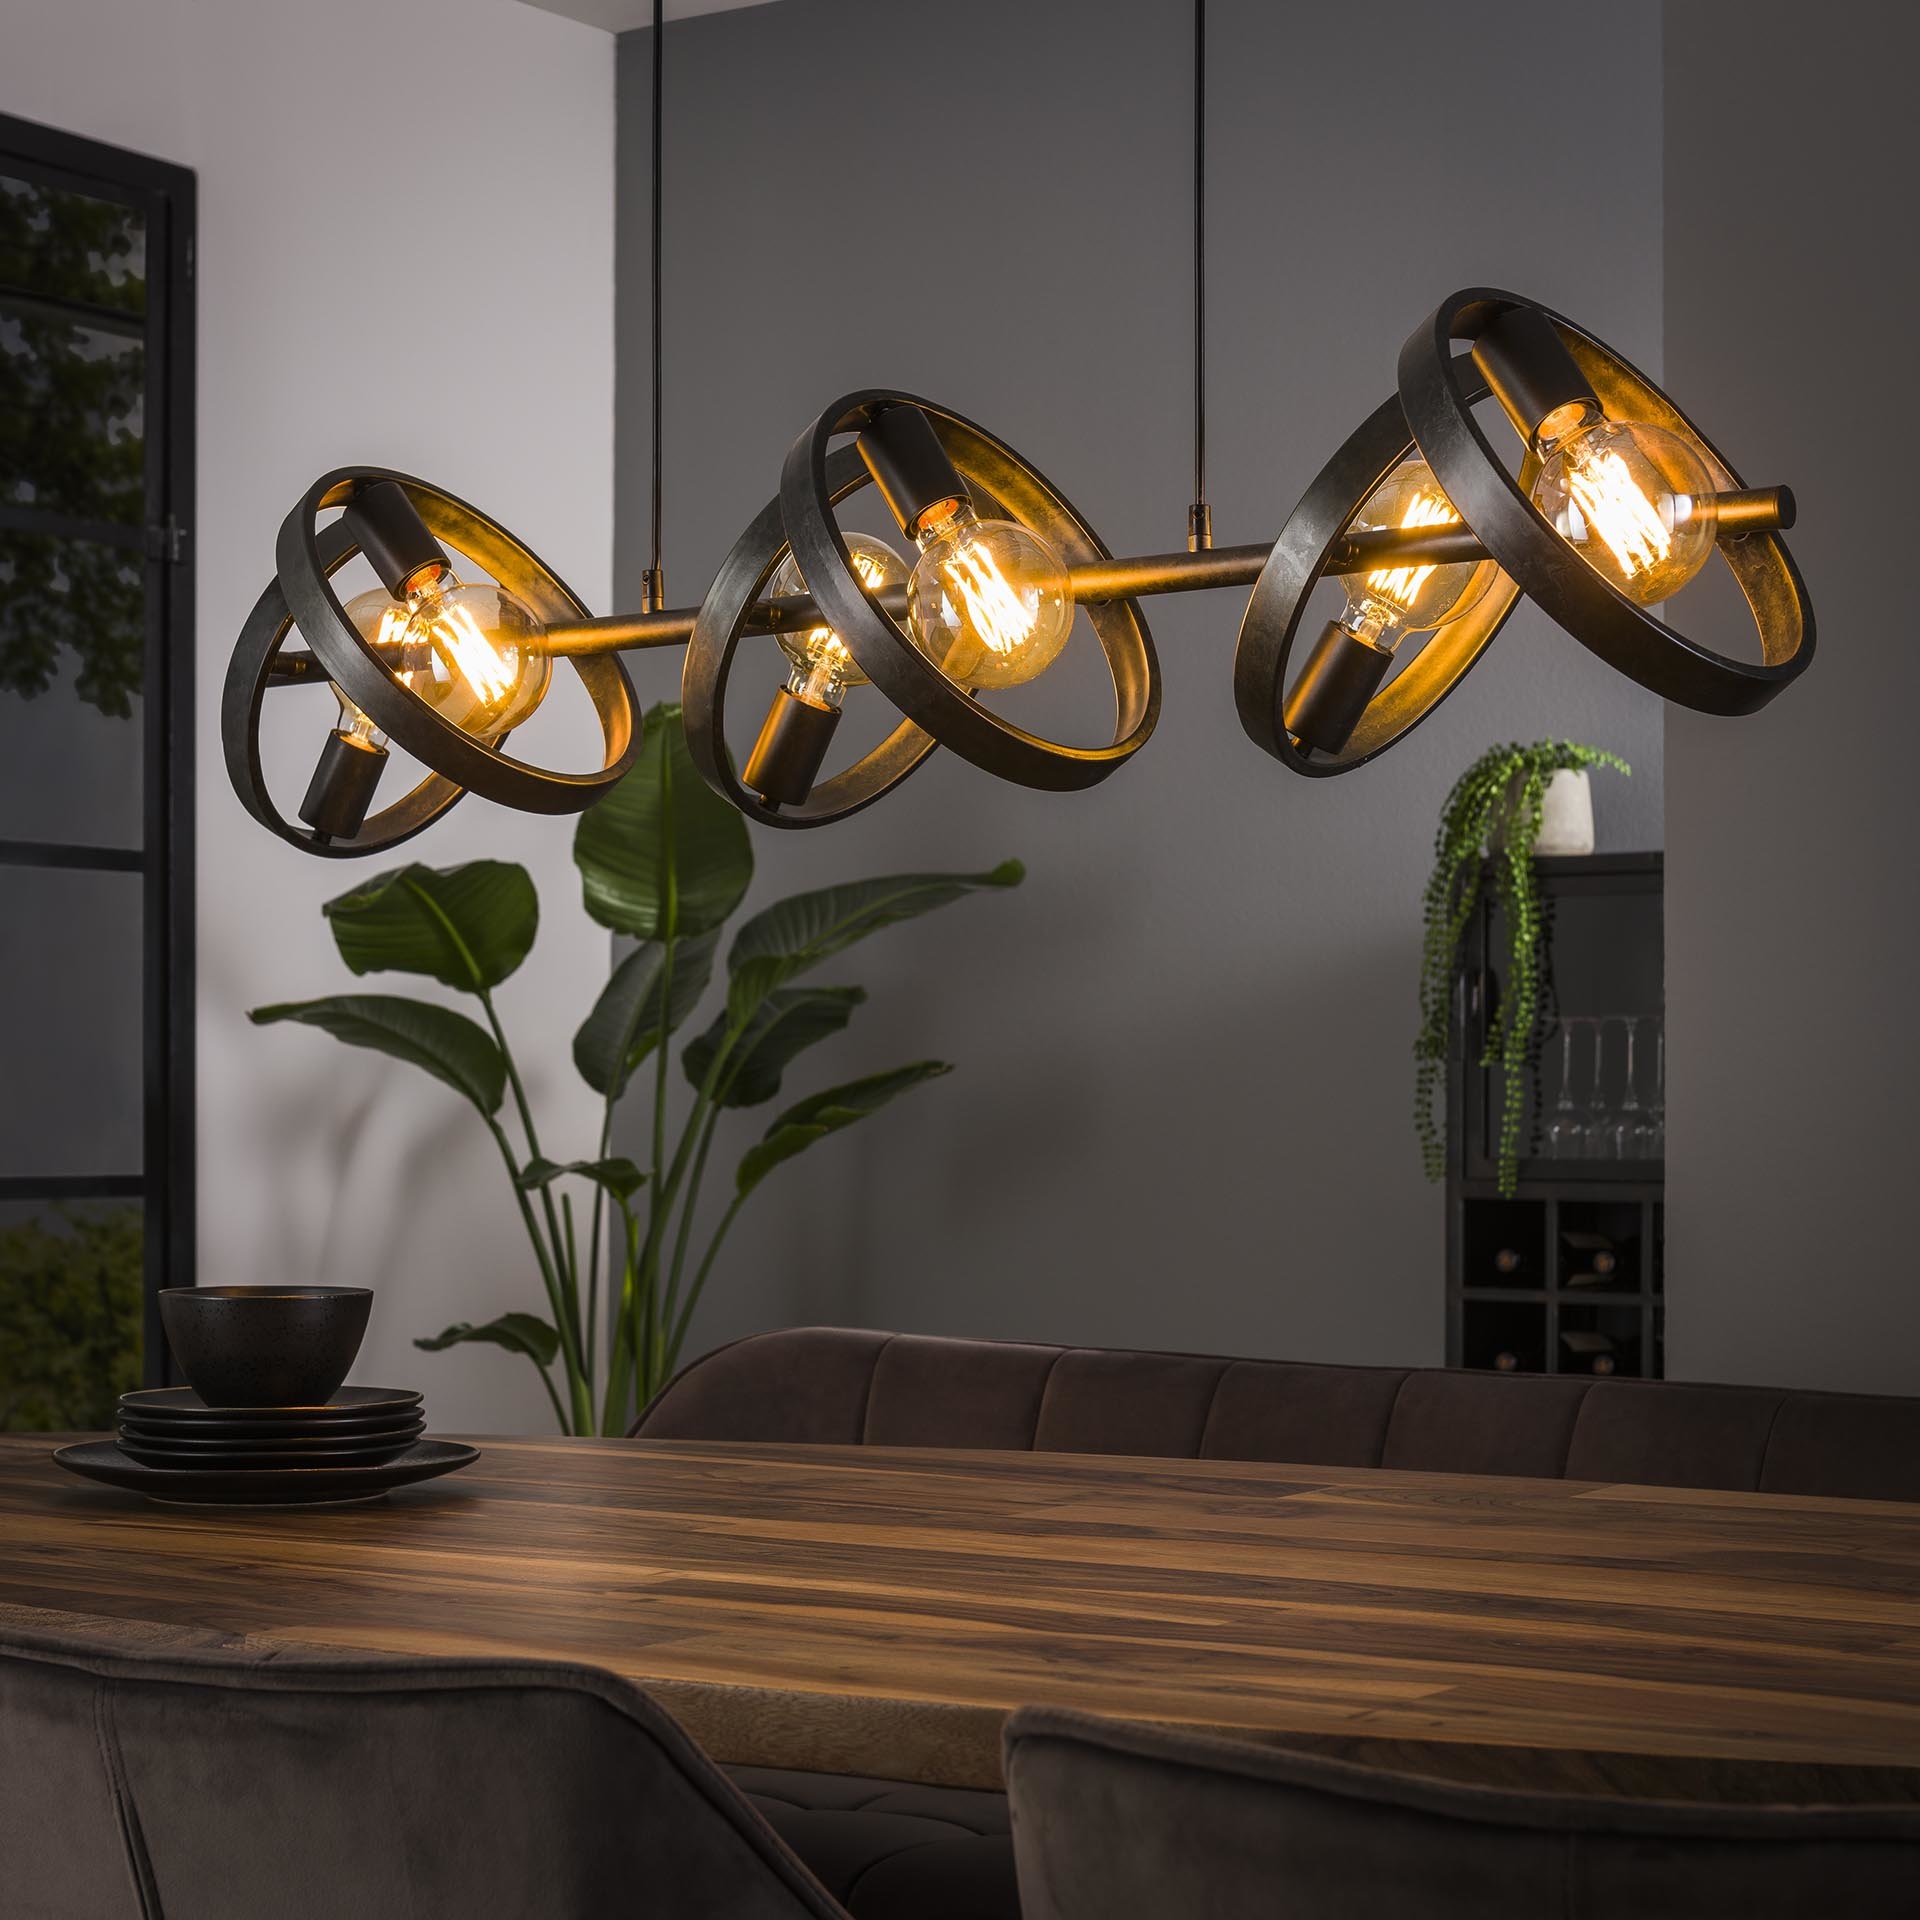 Poppy LED-Beleuchtung kopen? - Special Interior